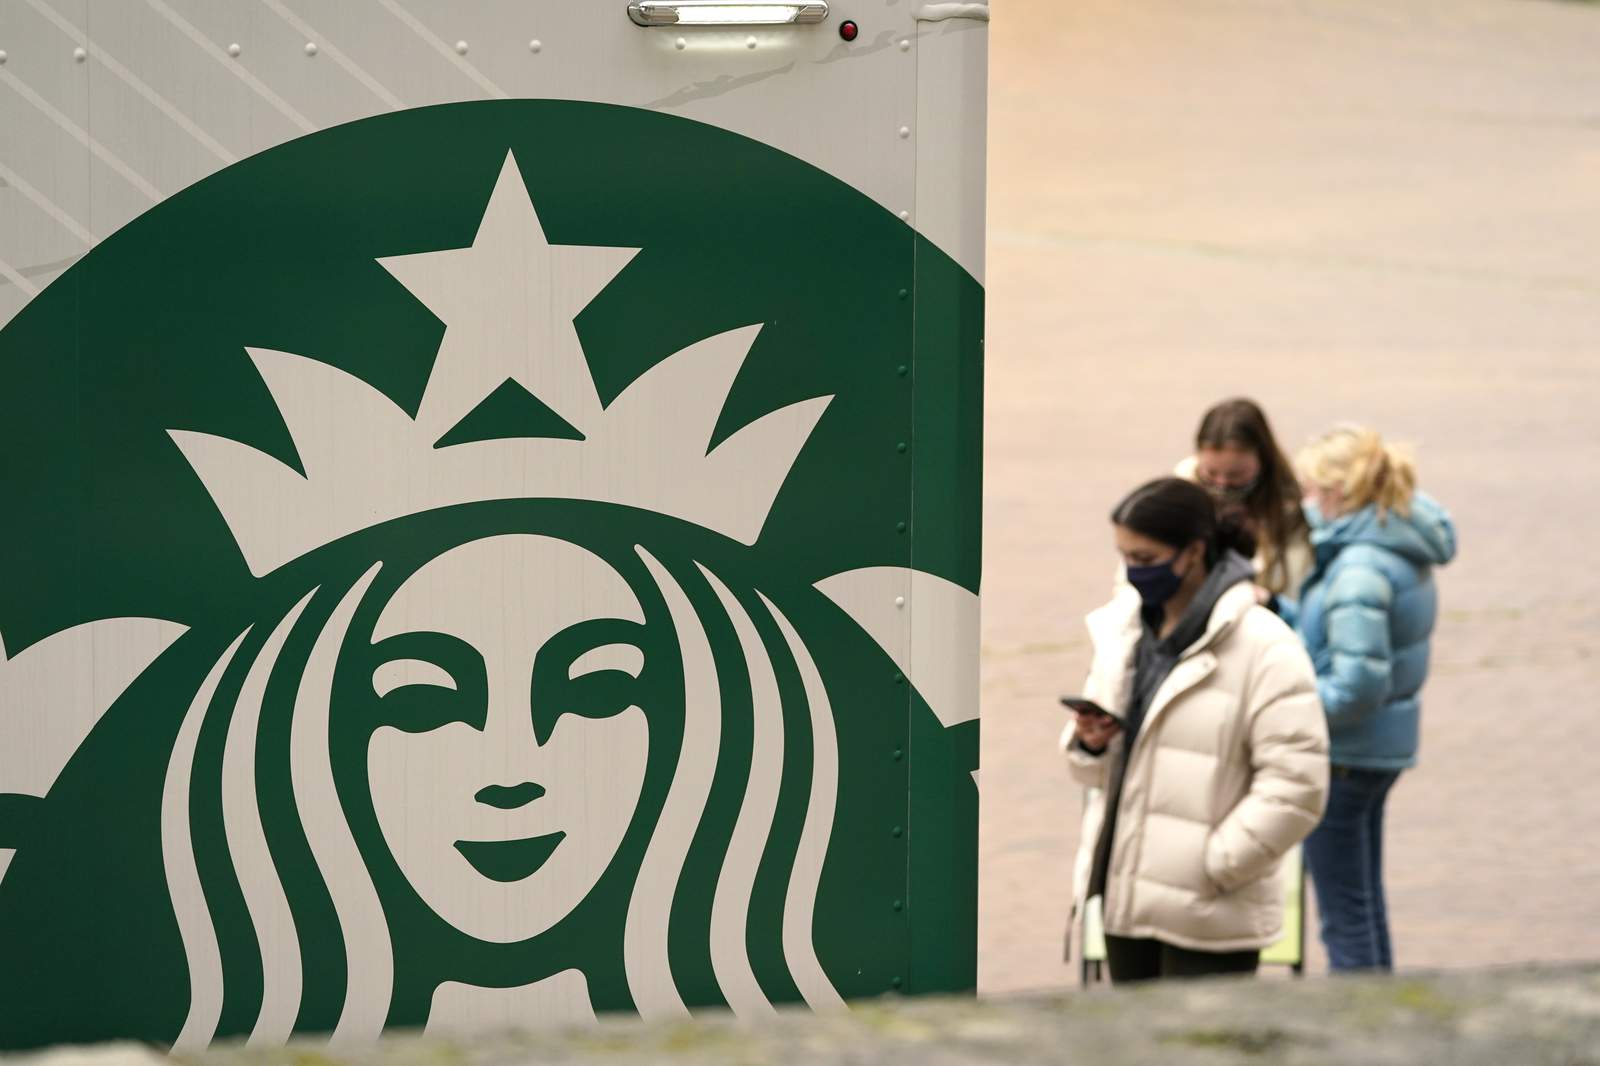 Starbucks' recovery, solid in China, still slow in the US